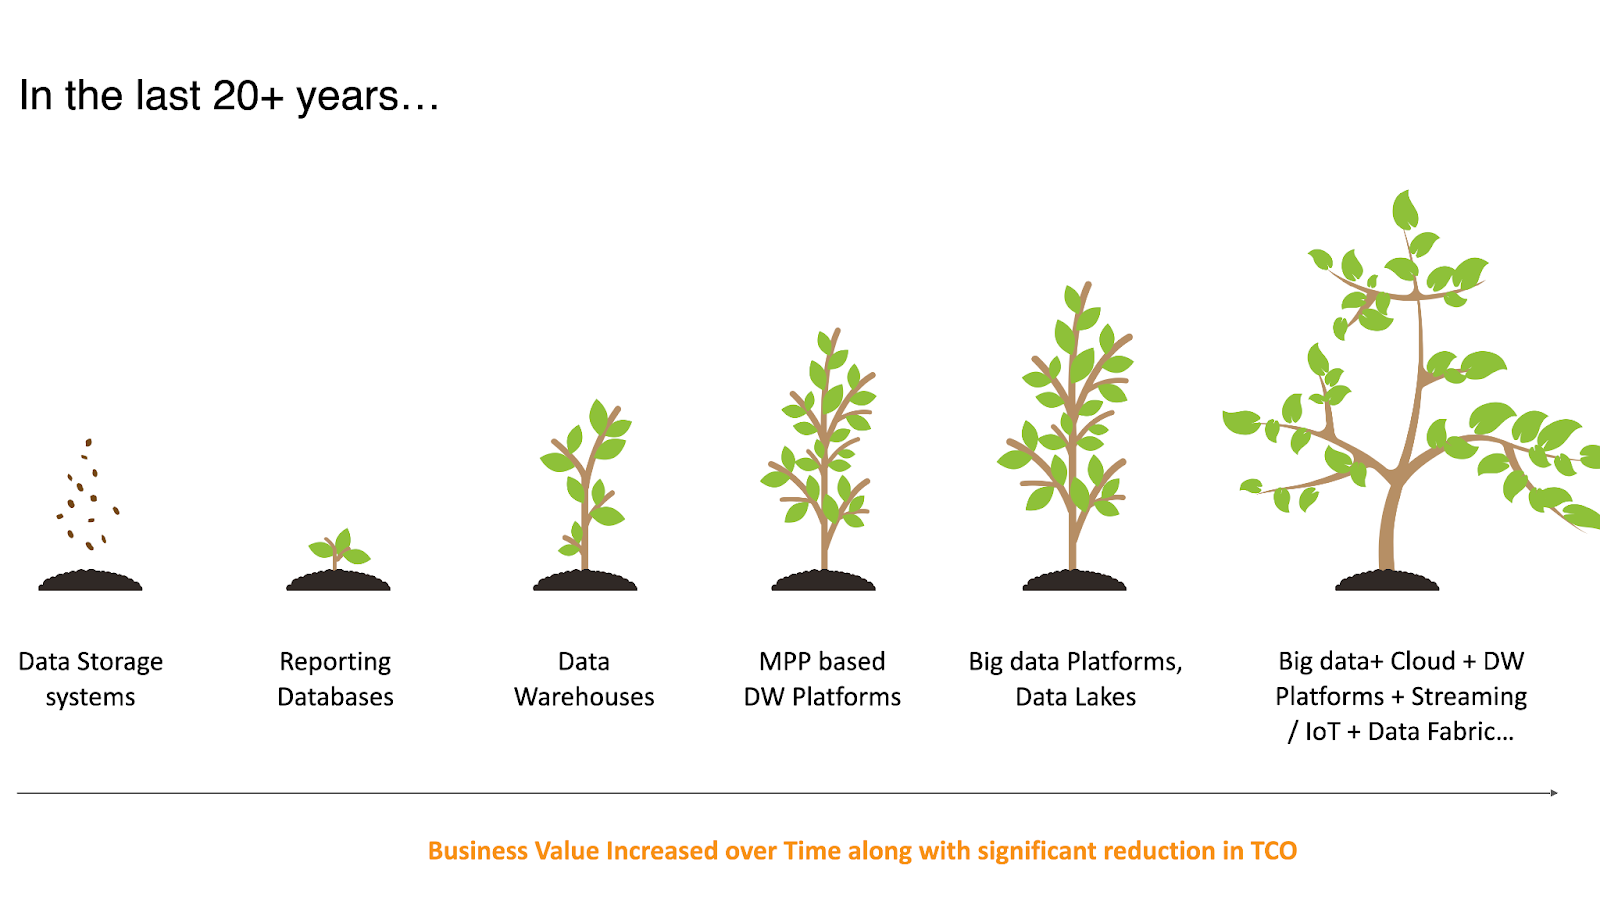 Business Value Increased over time along with significant reduction in TCO